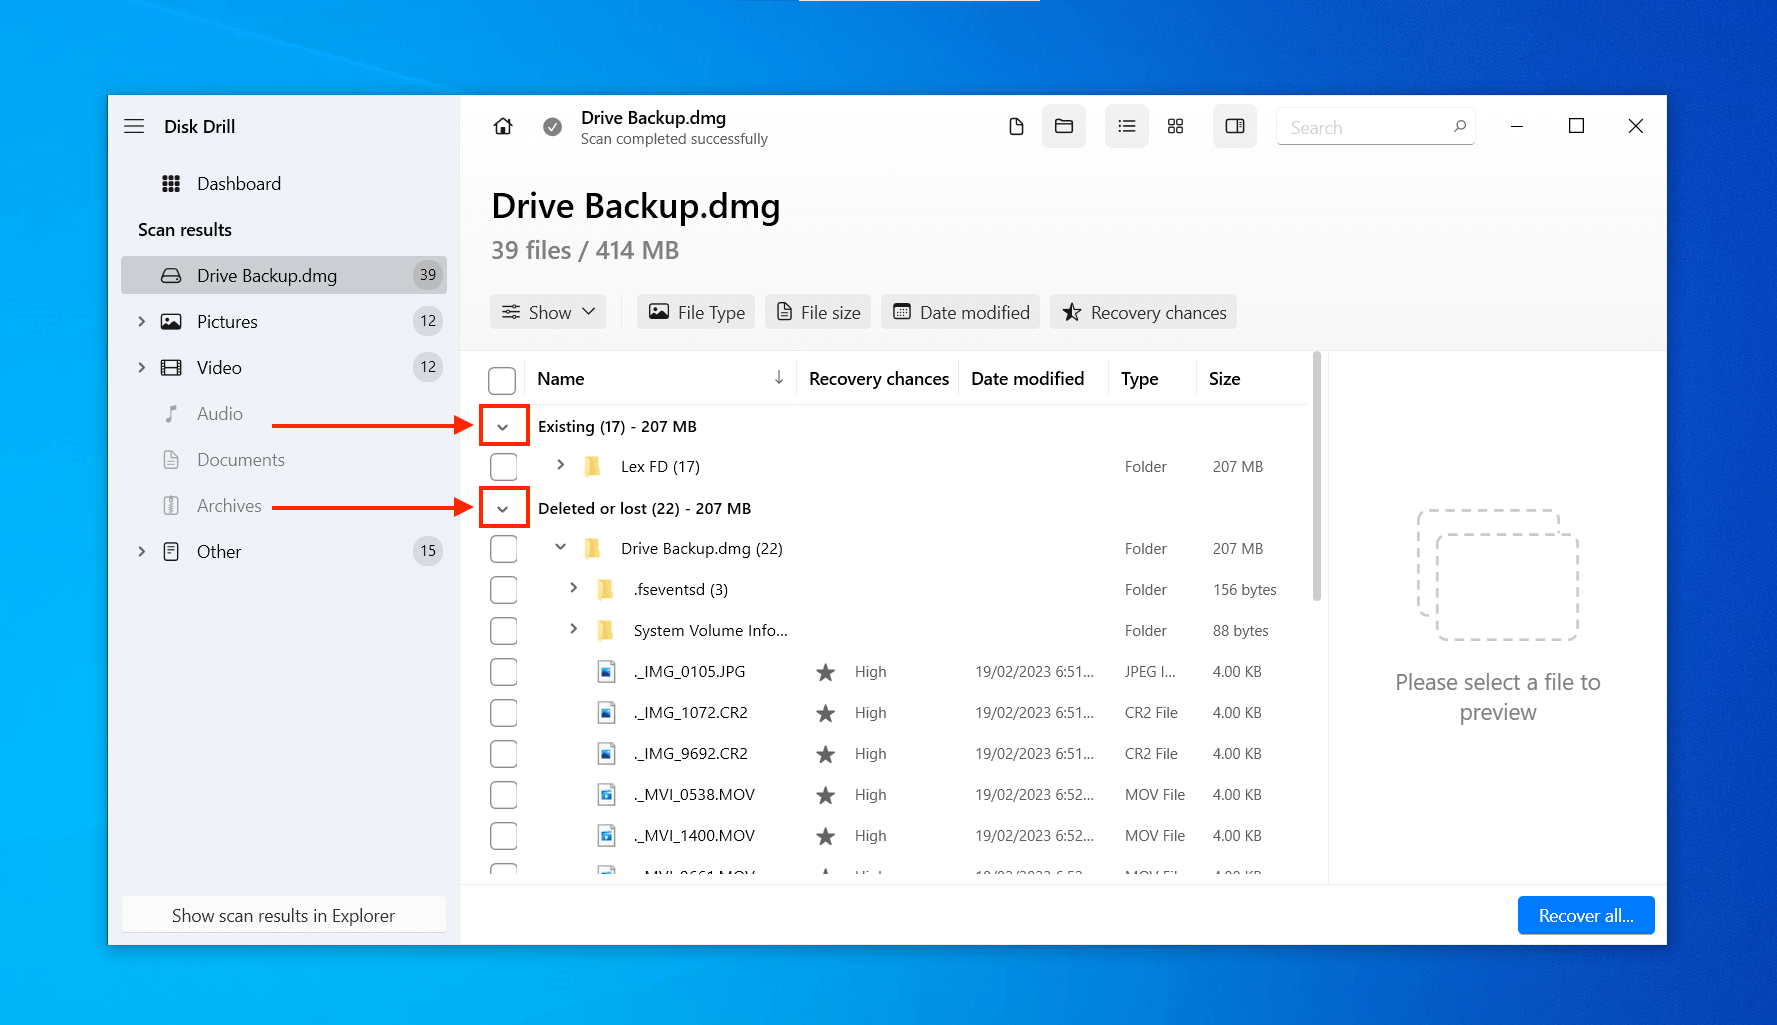 Disk Drill existing and deleted data list